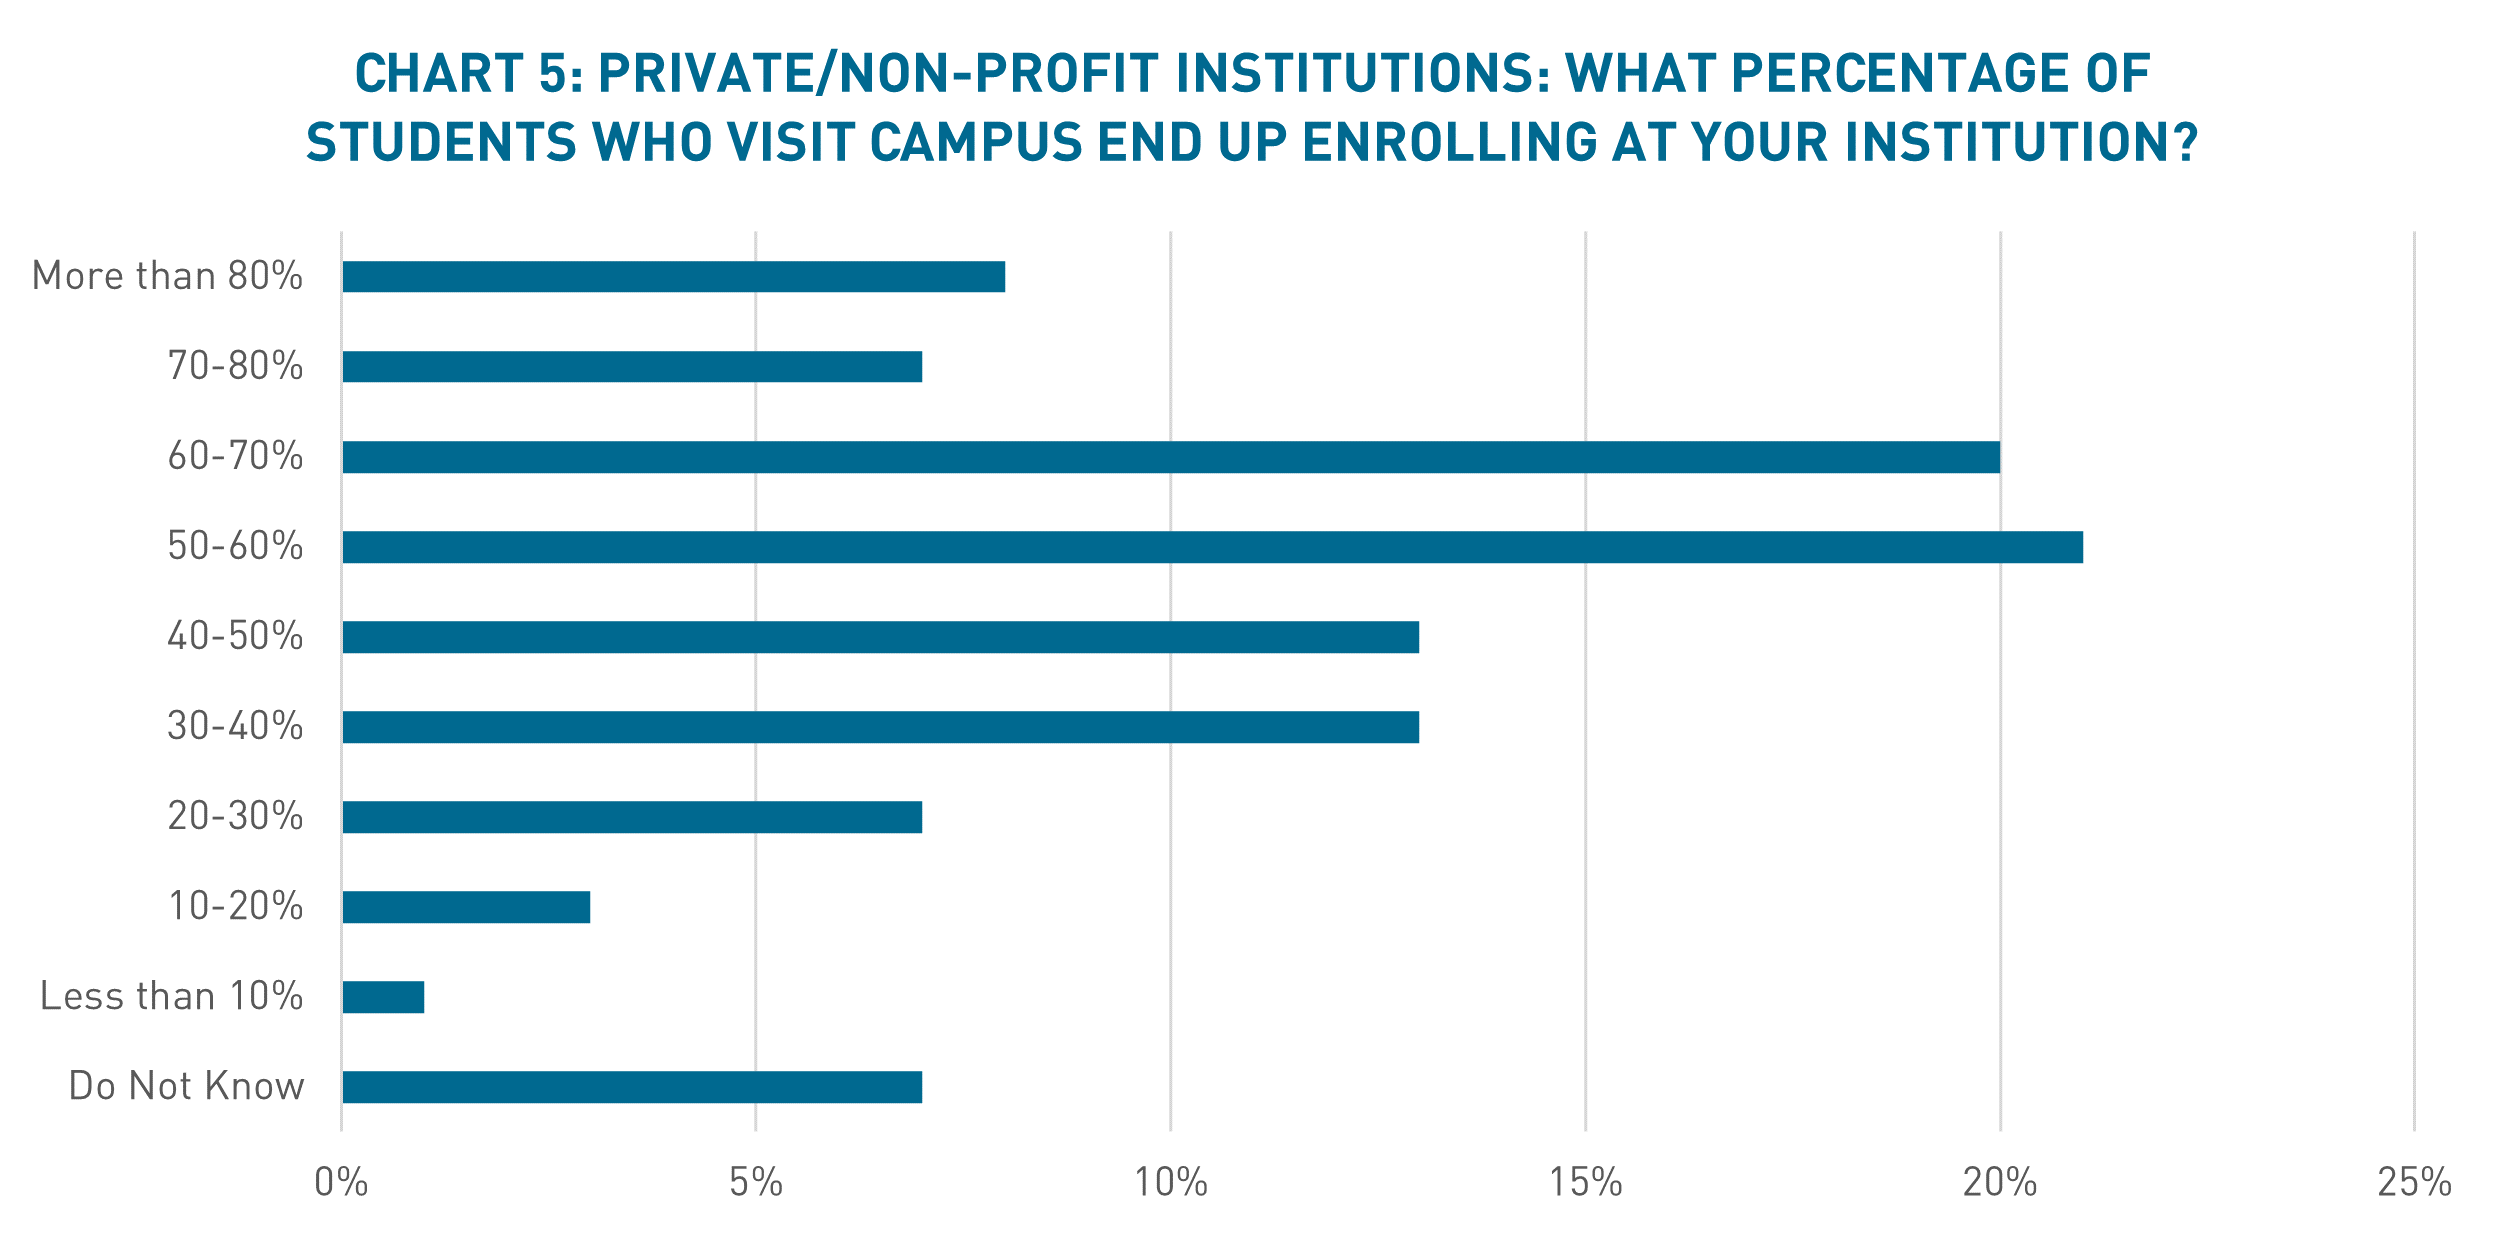 Chart 5 shows how campus tours affect enrollment at private institutions